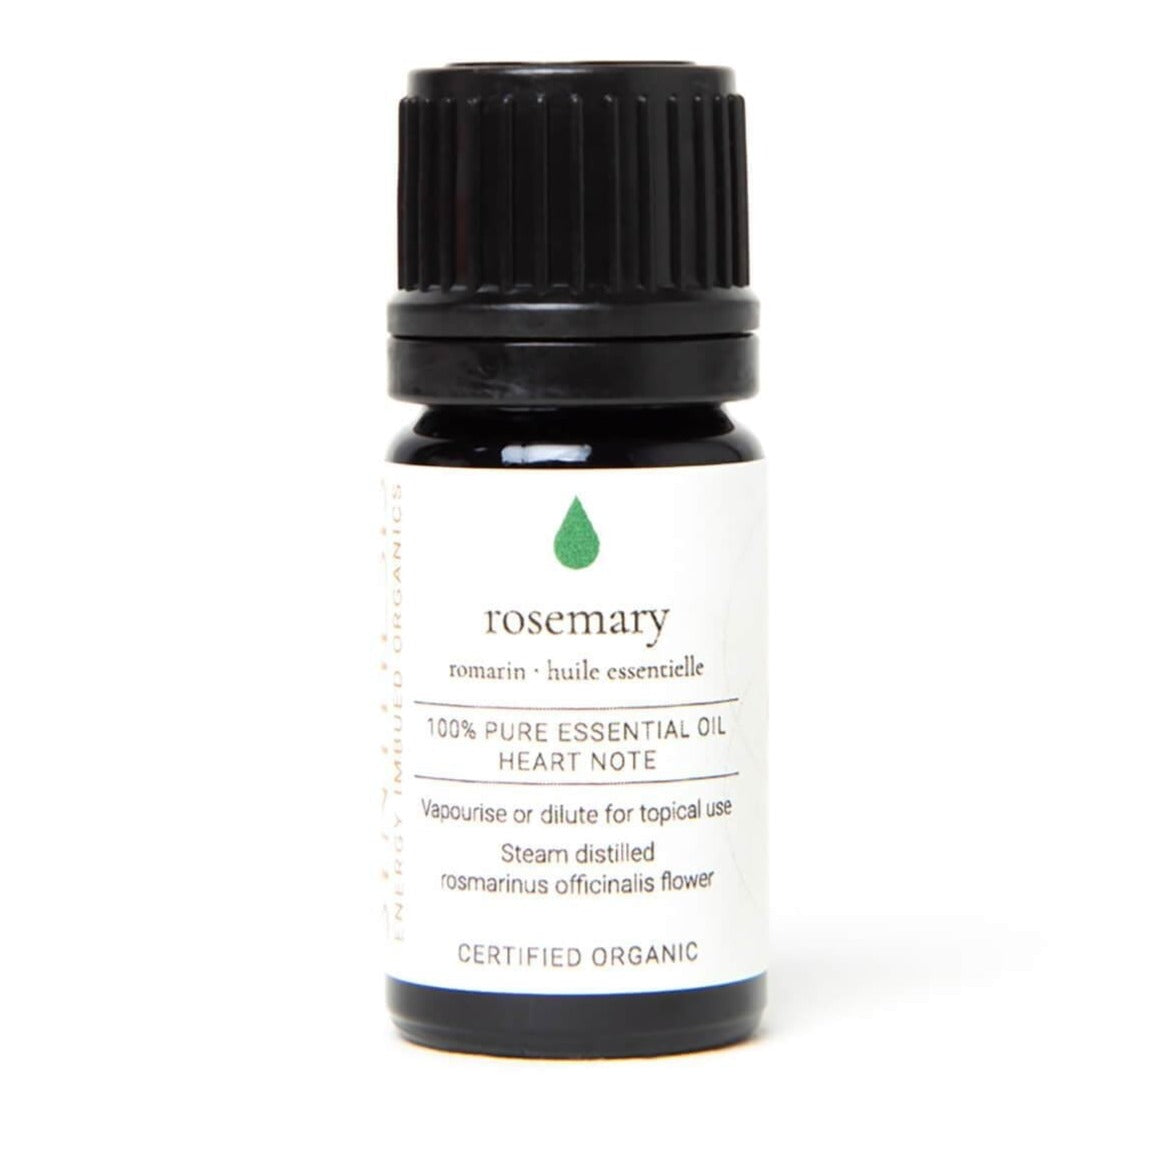 Rosemary Certified Organic Essential Oil aroma Synthesis Organics